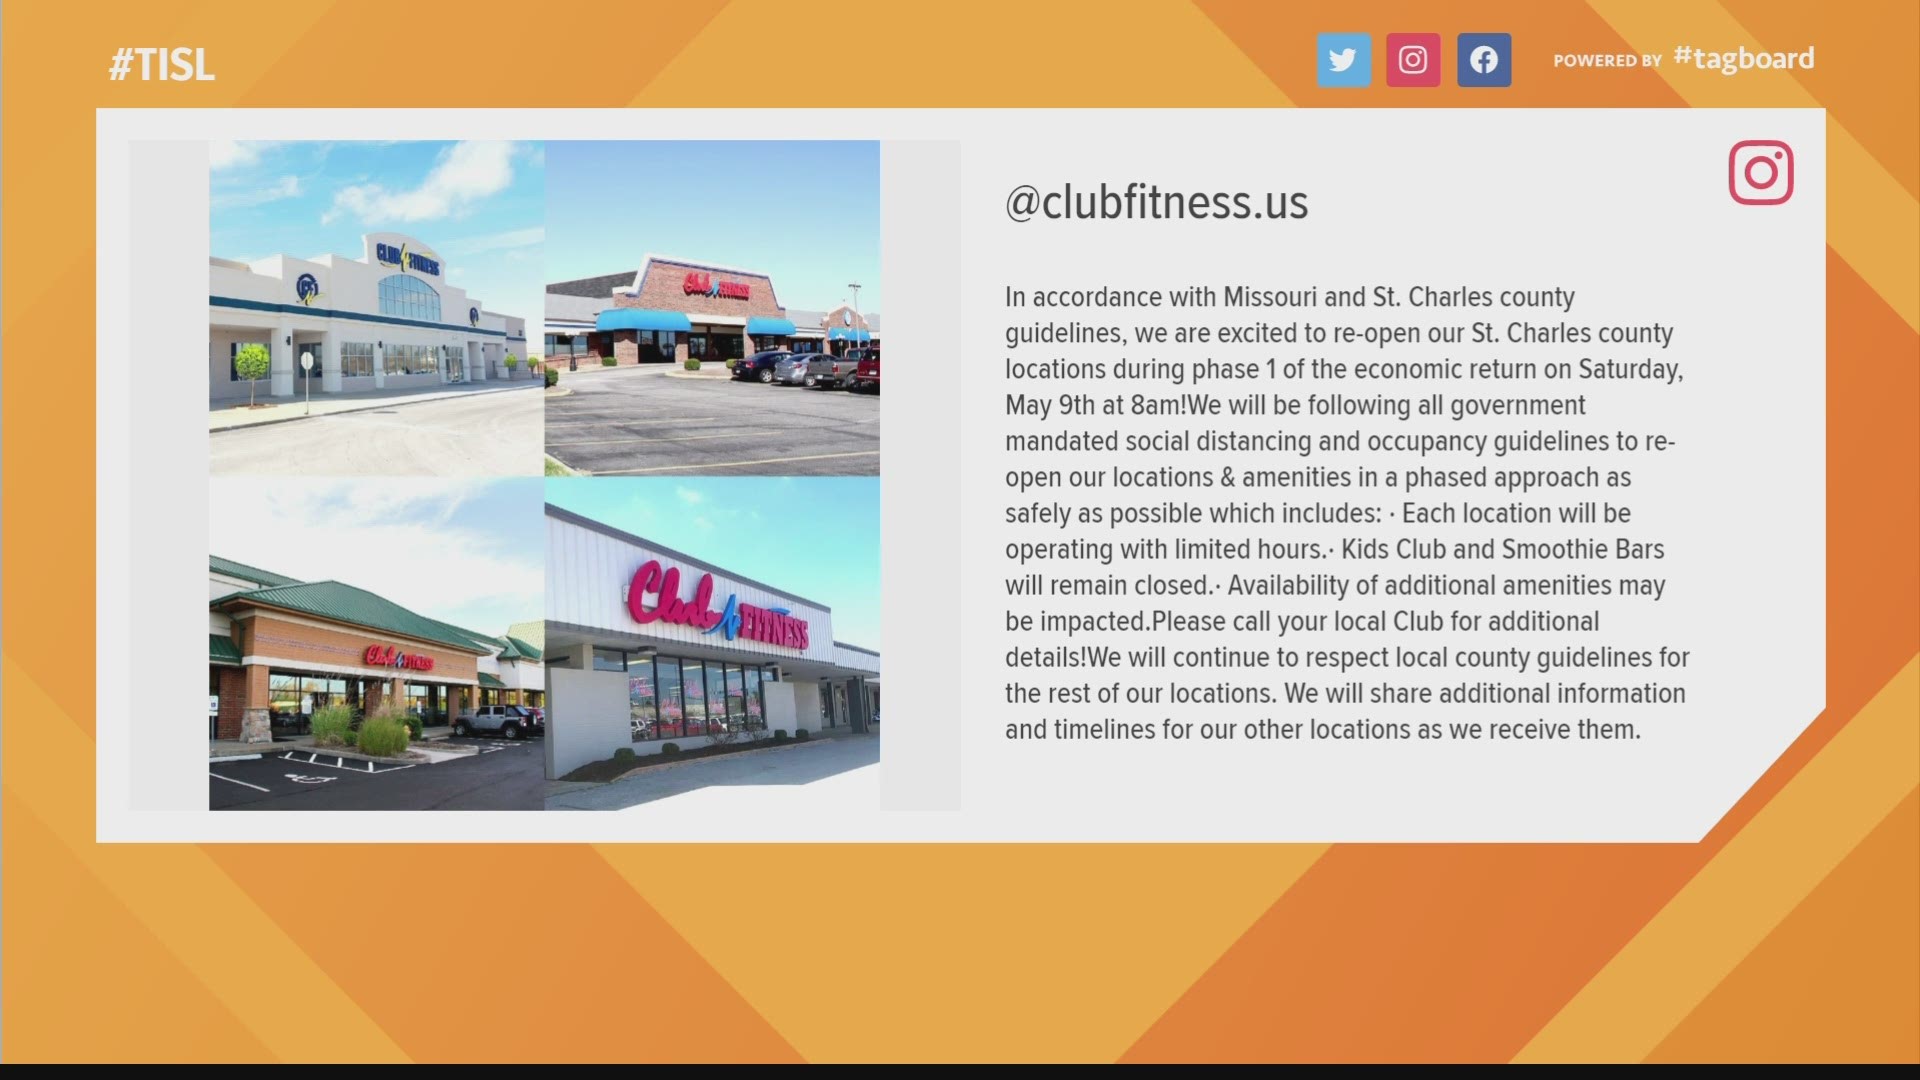 Club Fitness posted on its Instagram that it'll reopen in May